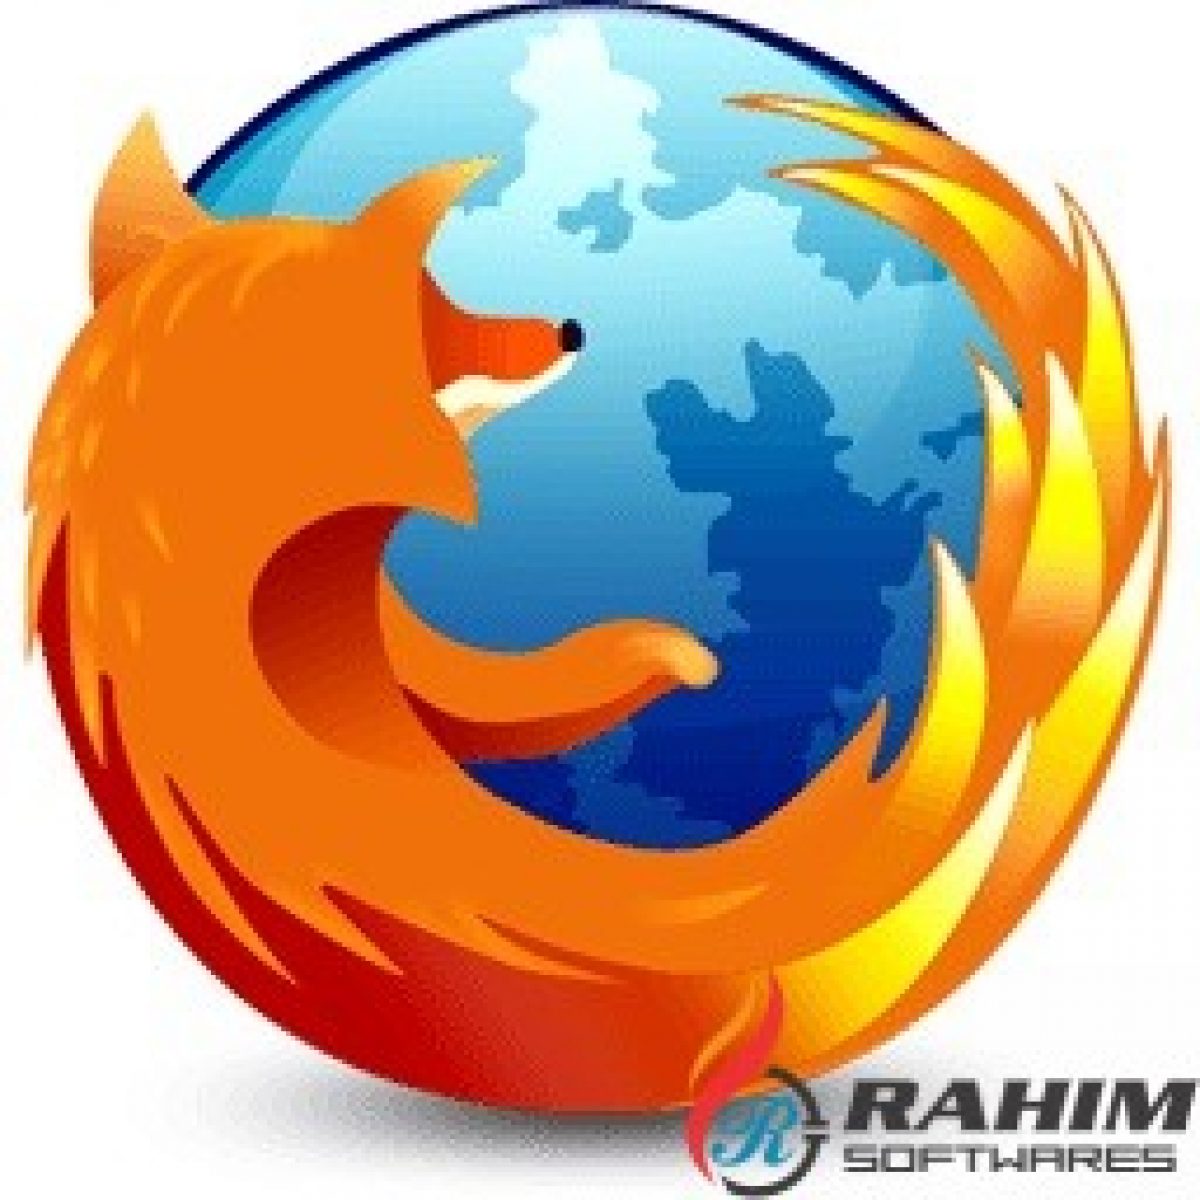 free firefox download for mac